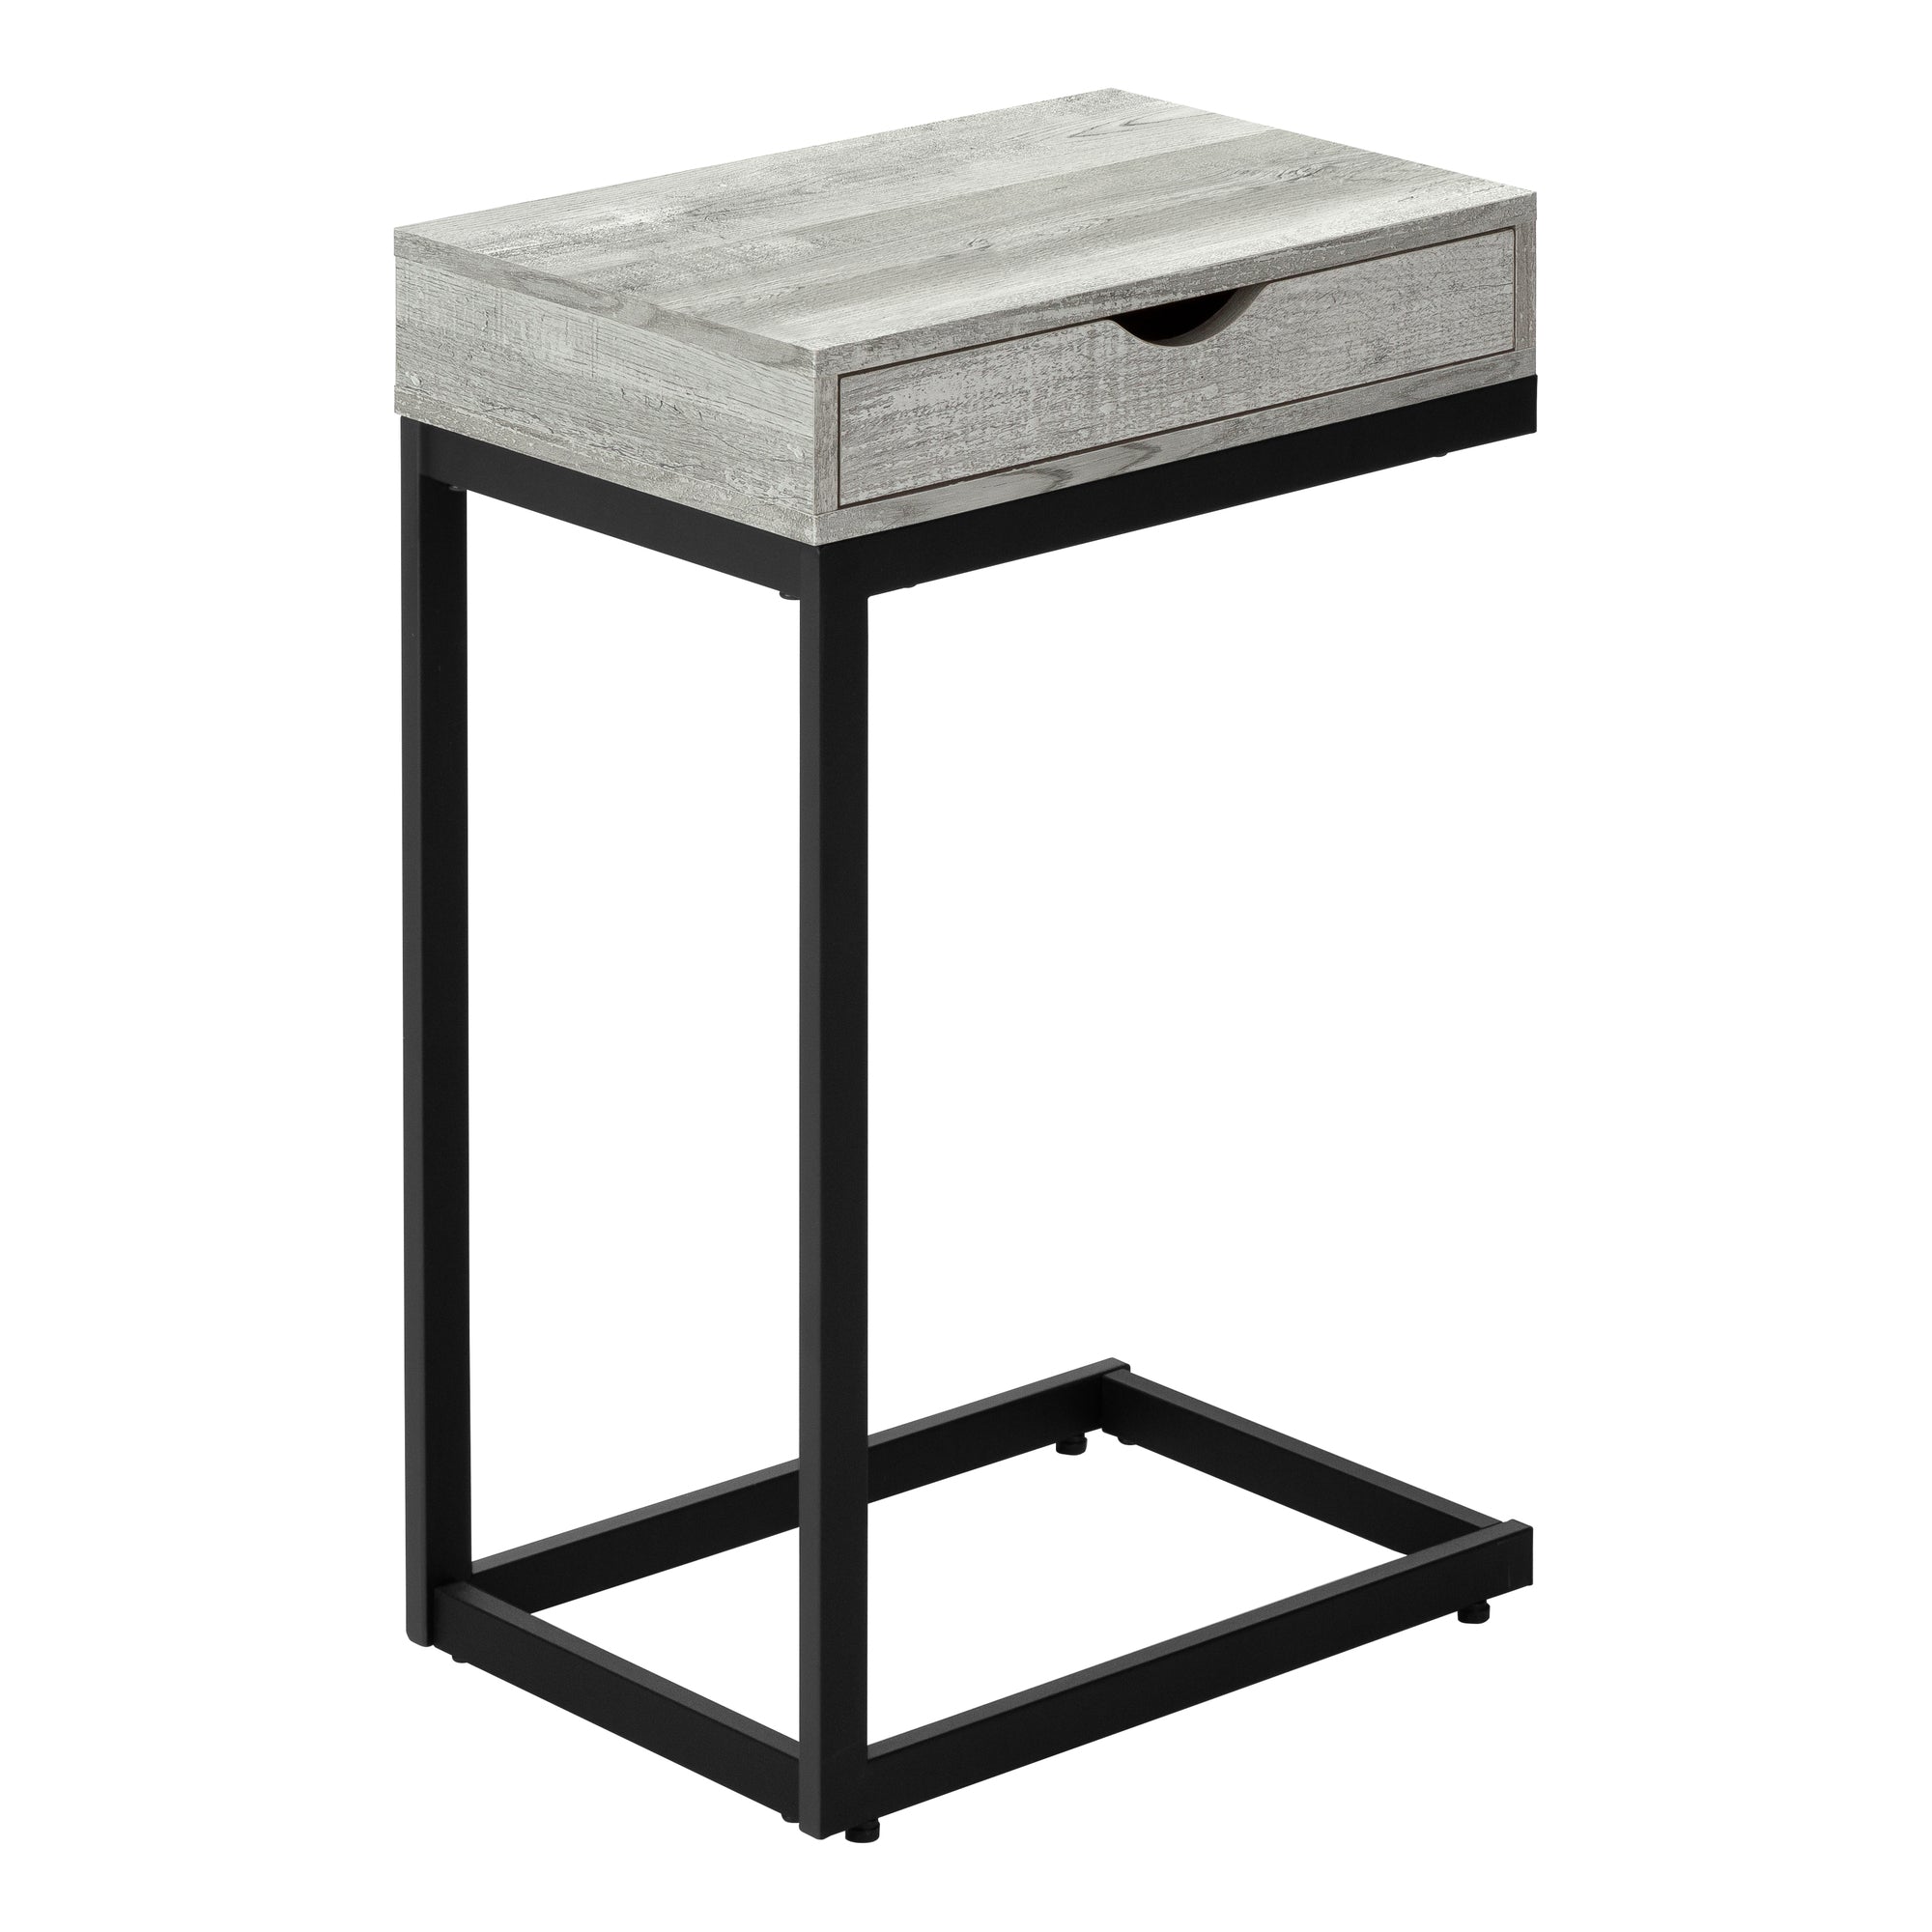 MN-503407    Accent Table, C-Shaped, End, Side, Snack, Living Room, Bedroom, Storage Drawer, Metal Legs, Laminate, Grey Reclaimed Wood Look, Black, Contemporary, Modern